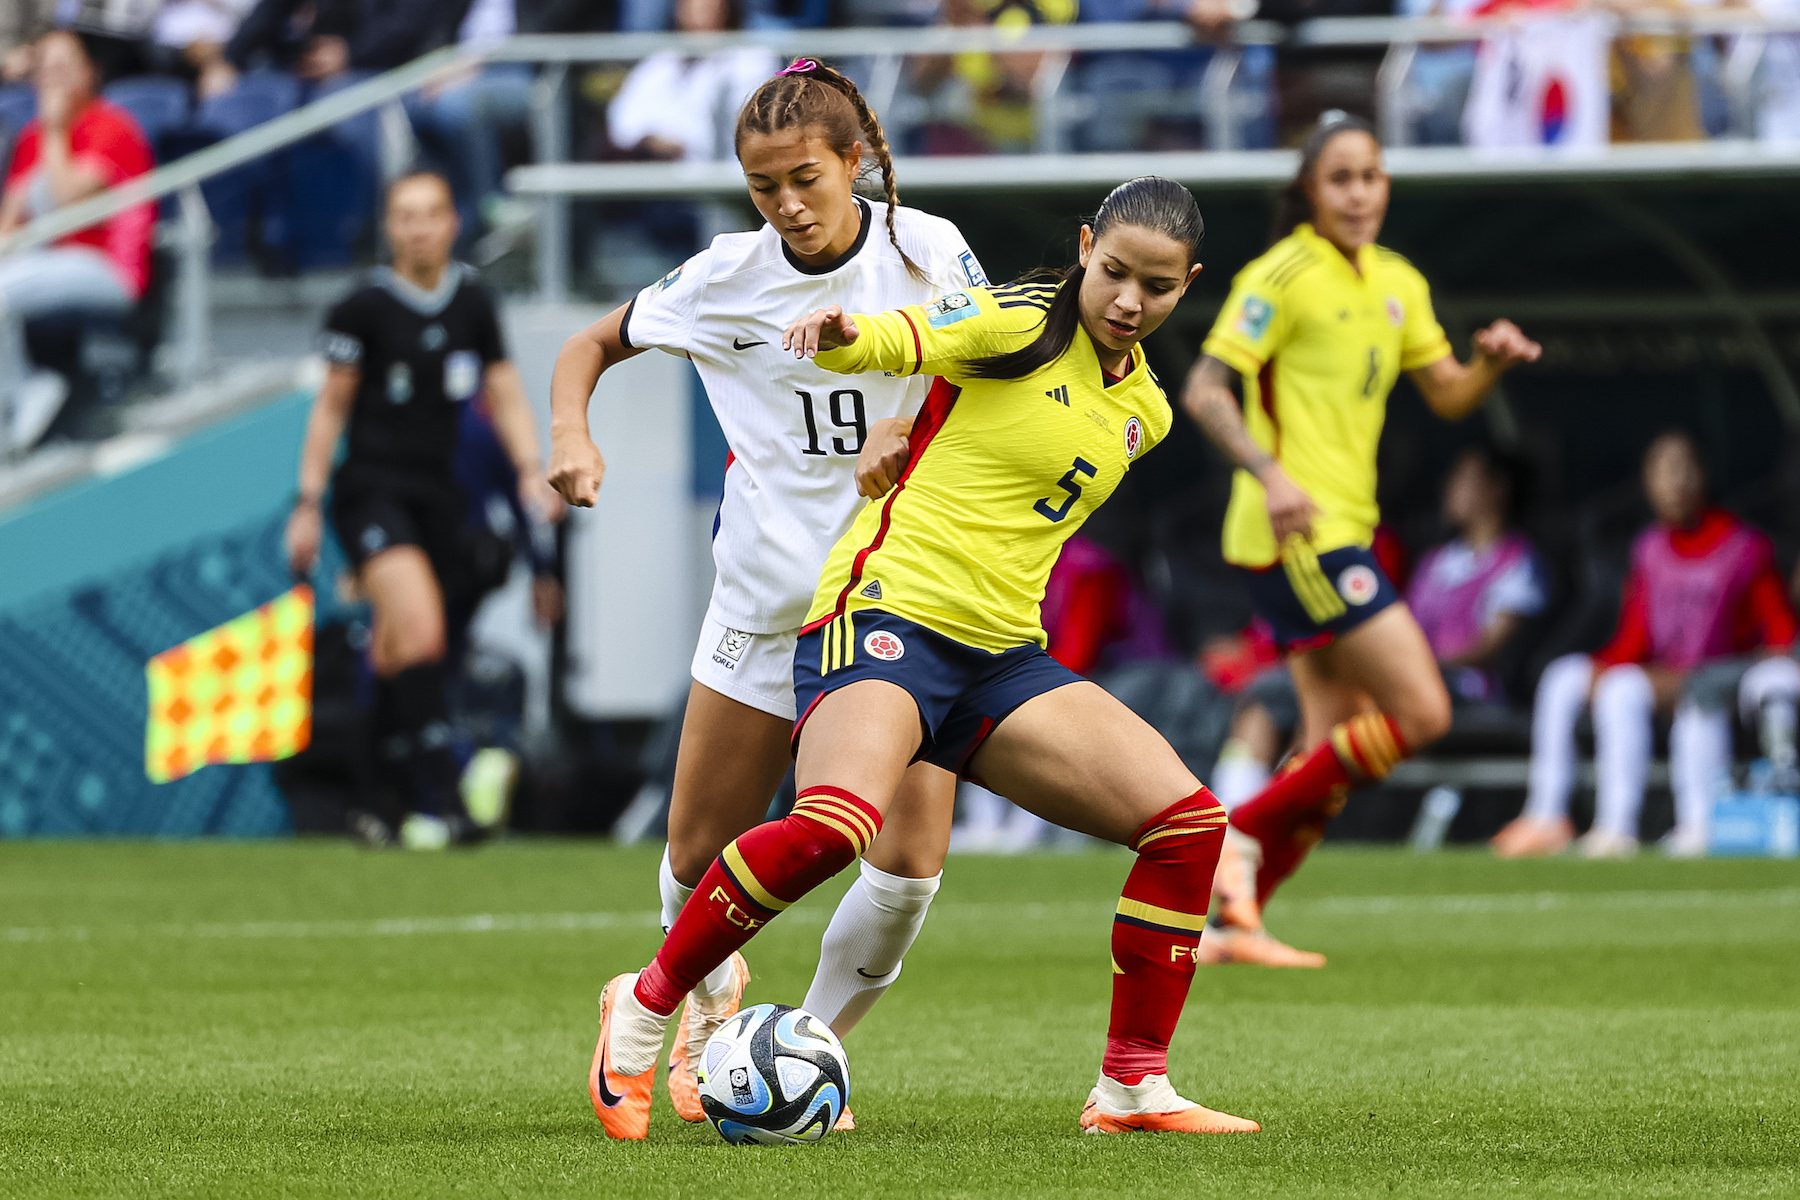 This 16-Year-Old South Korean Player Has Become The Youngest Person To Play At The Women’s World Cup